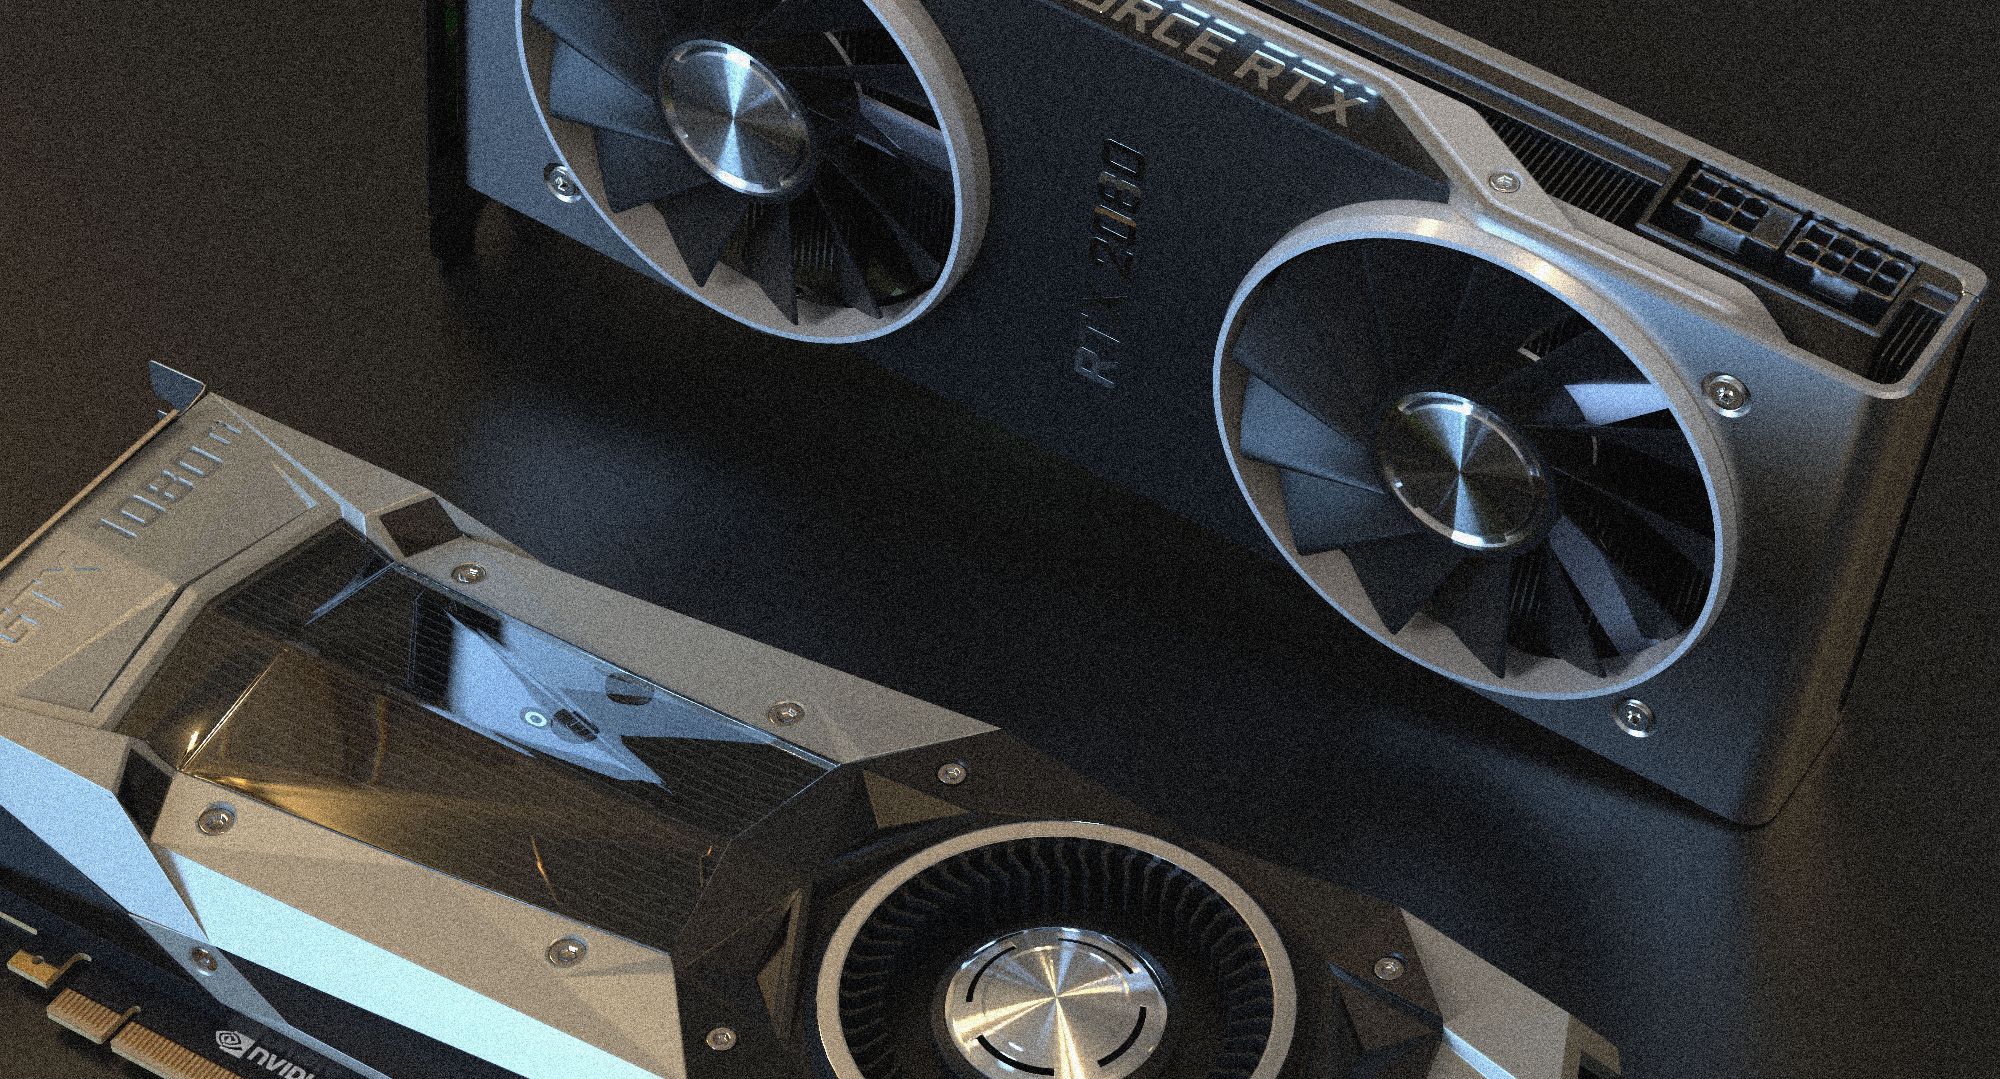 Pictures of nvidia gtx 1080 and rtx 2080 gpu